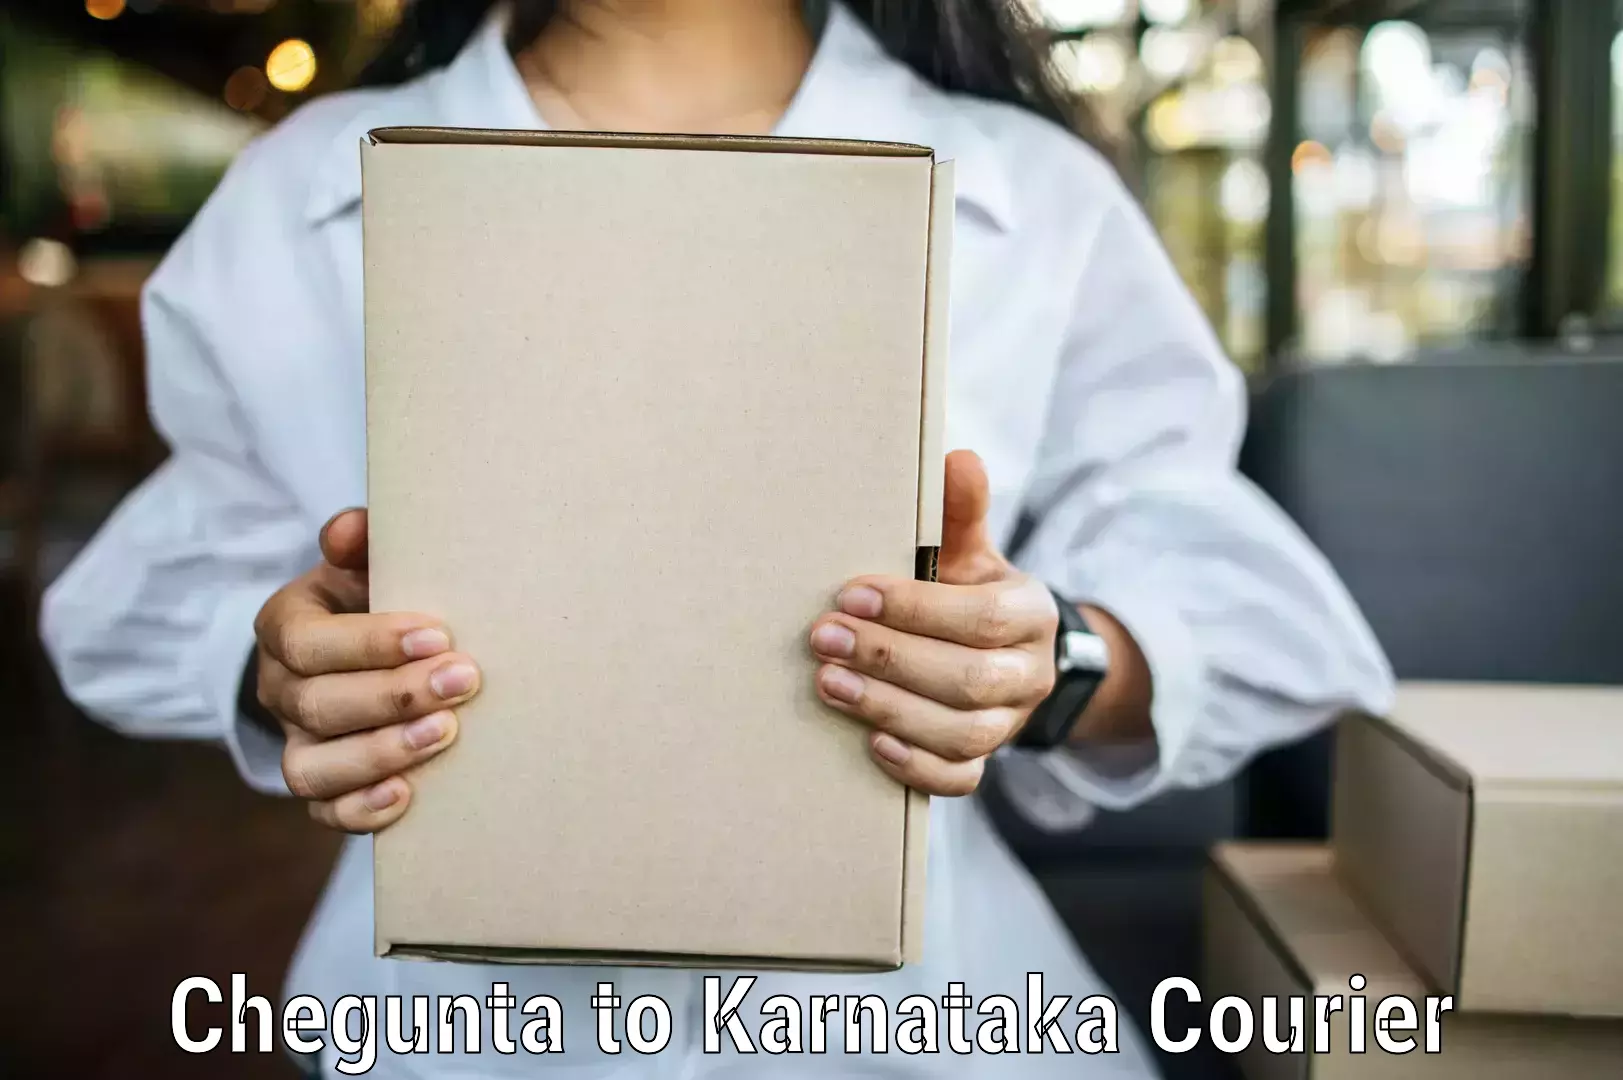 Reliable delivery network Chegunta to Chikkamagalur